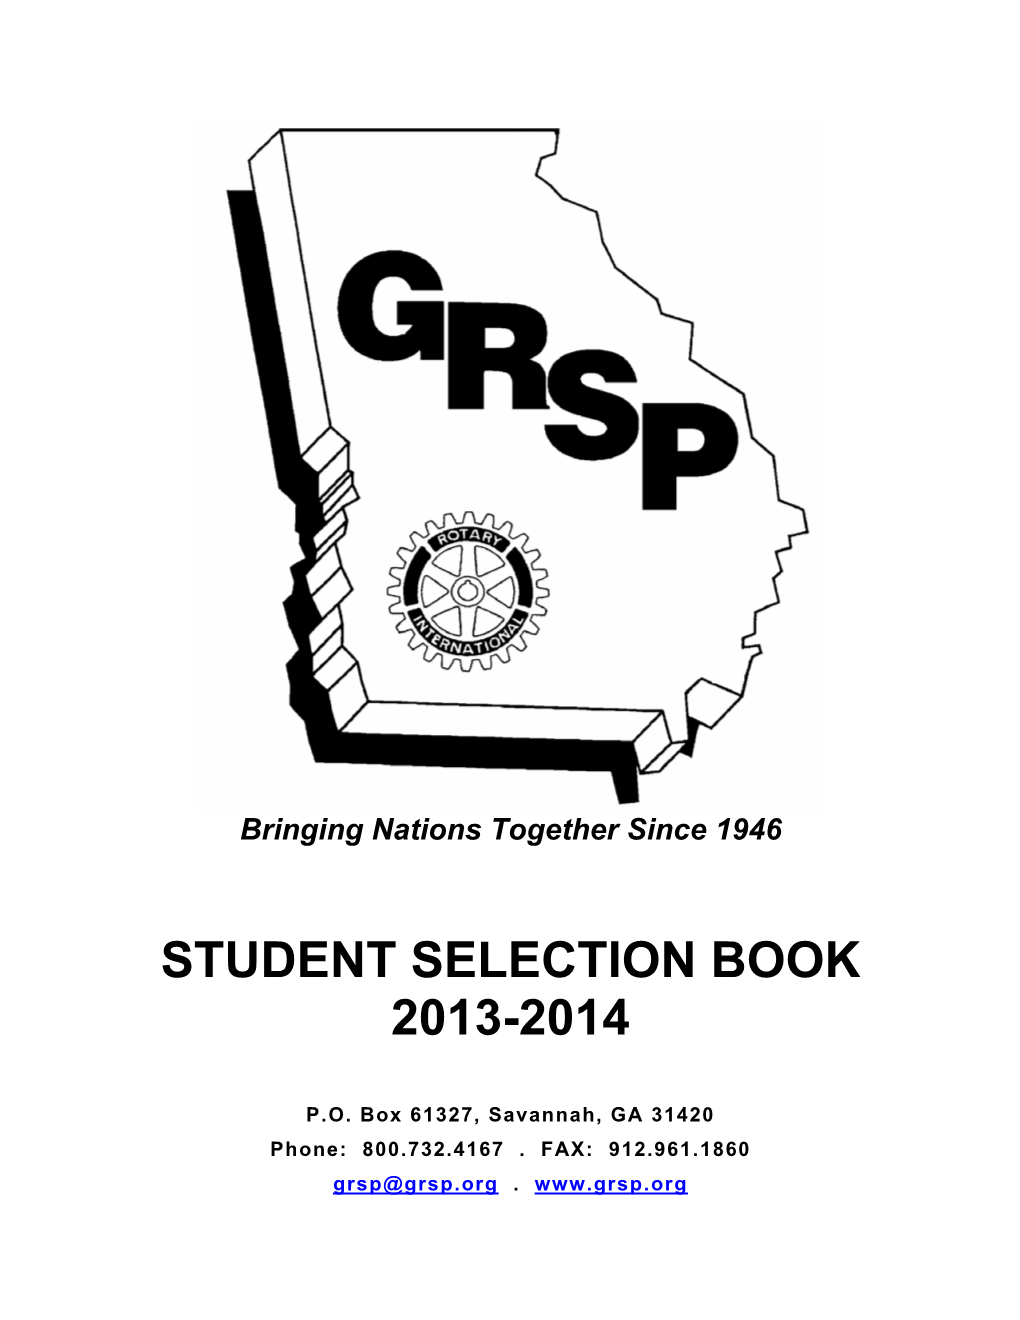 Student Selection Book 2013-2014